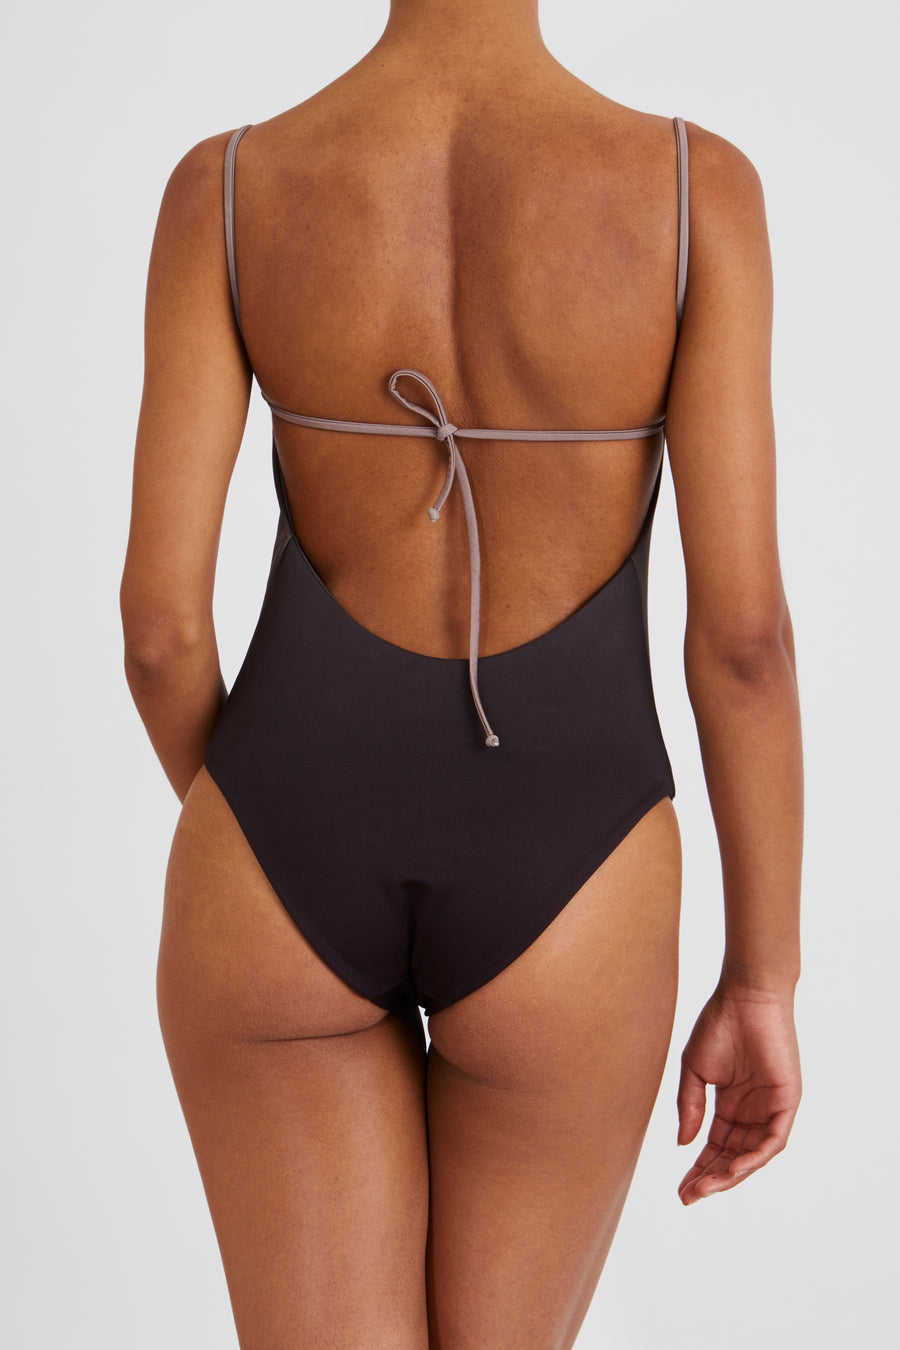 Swimsuit – edgy, earth